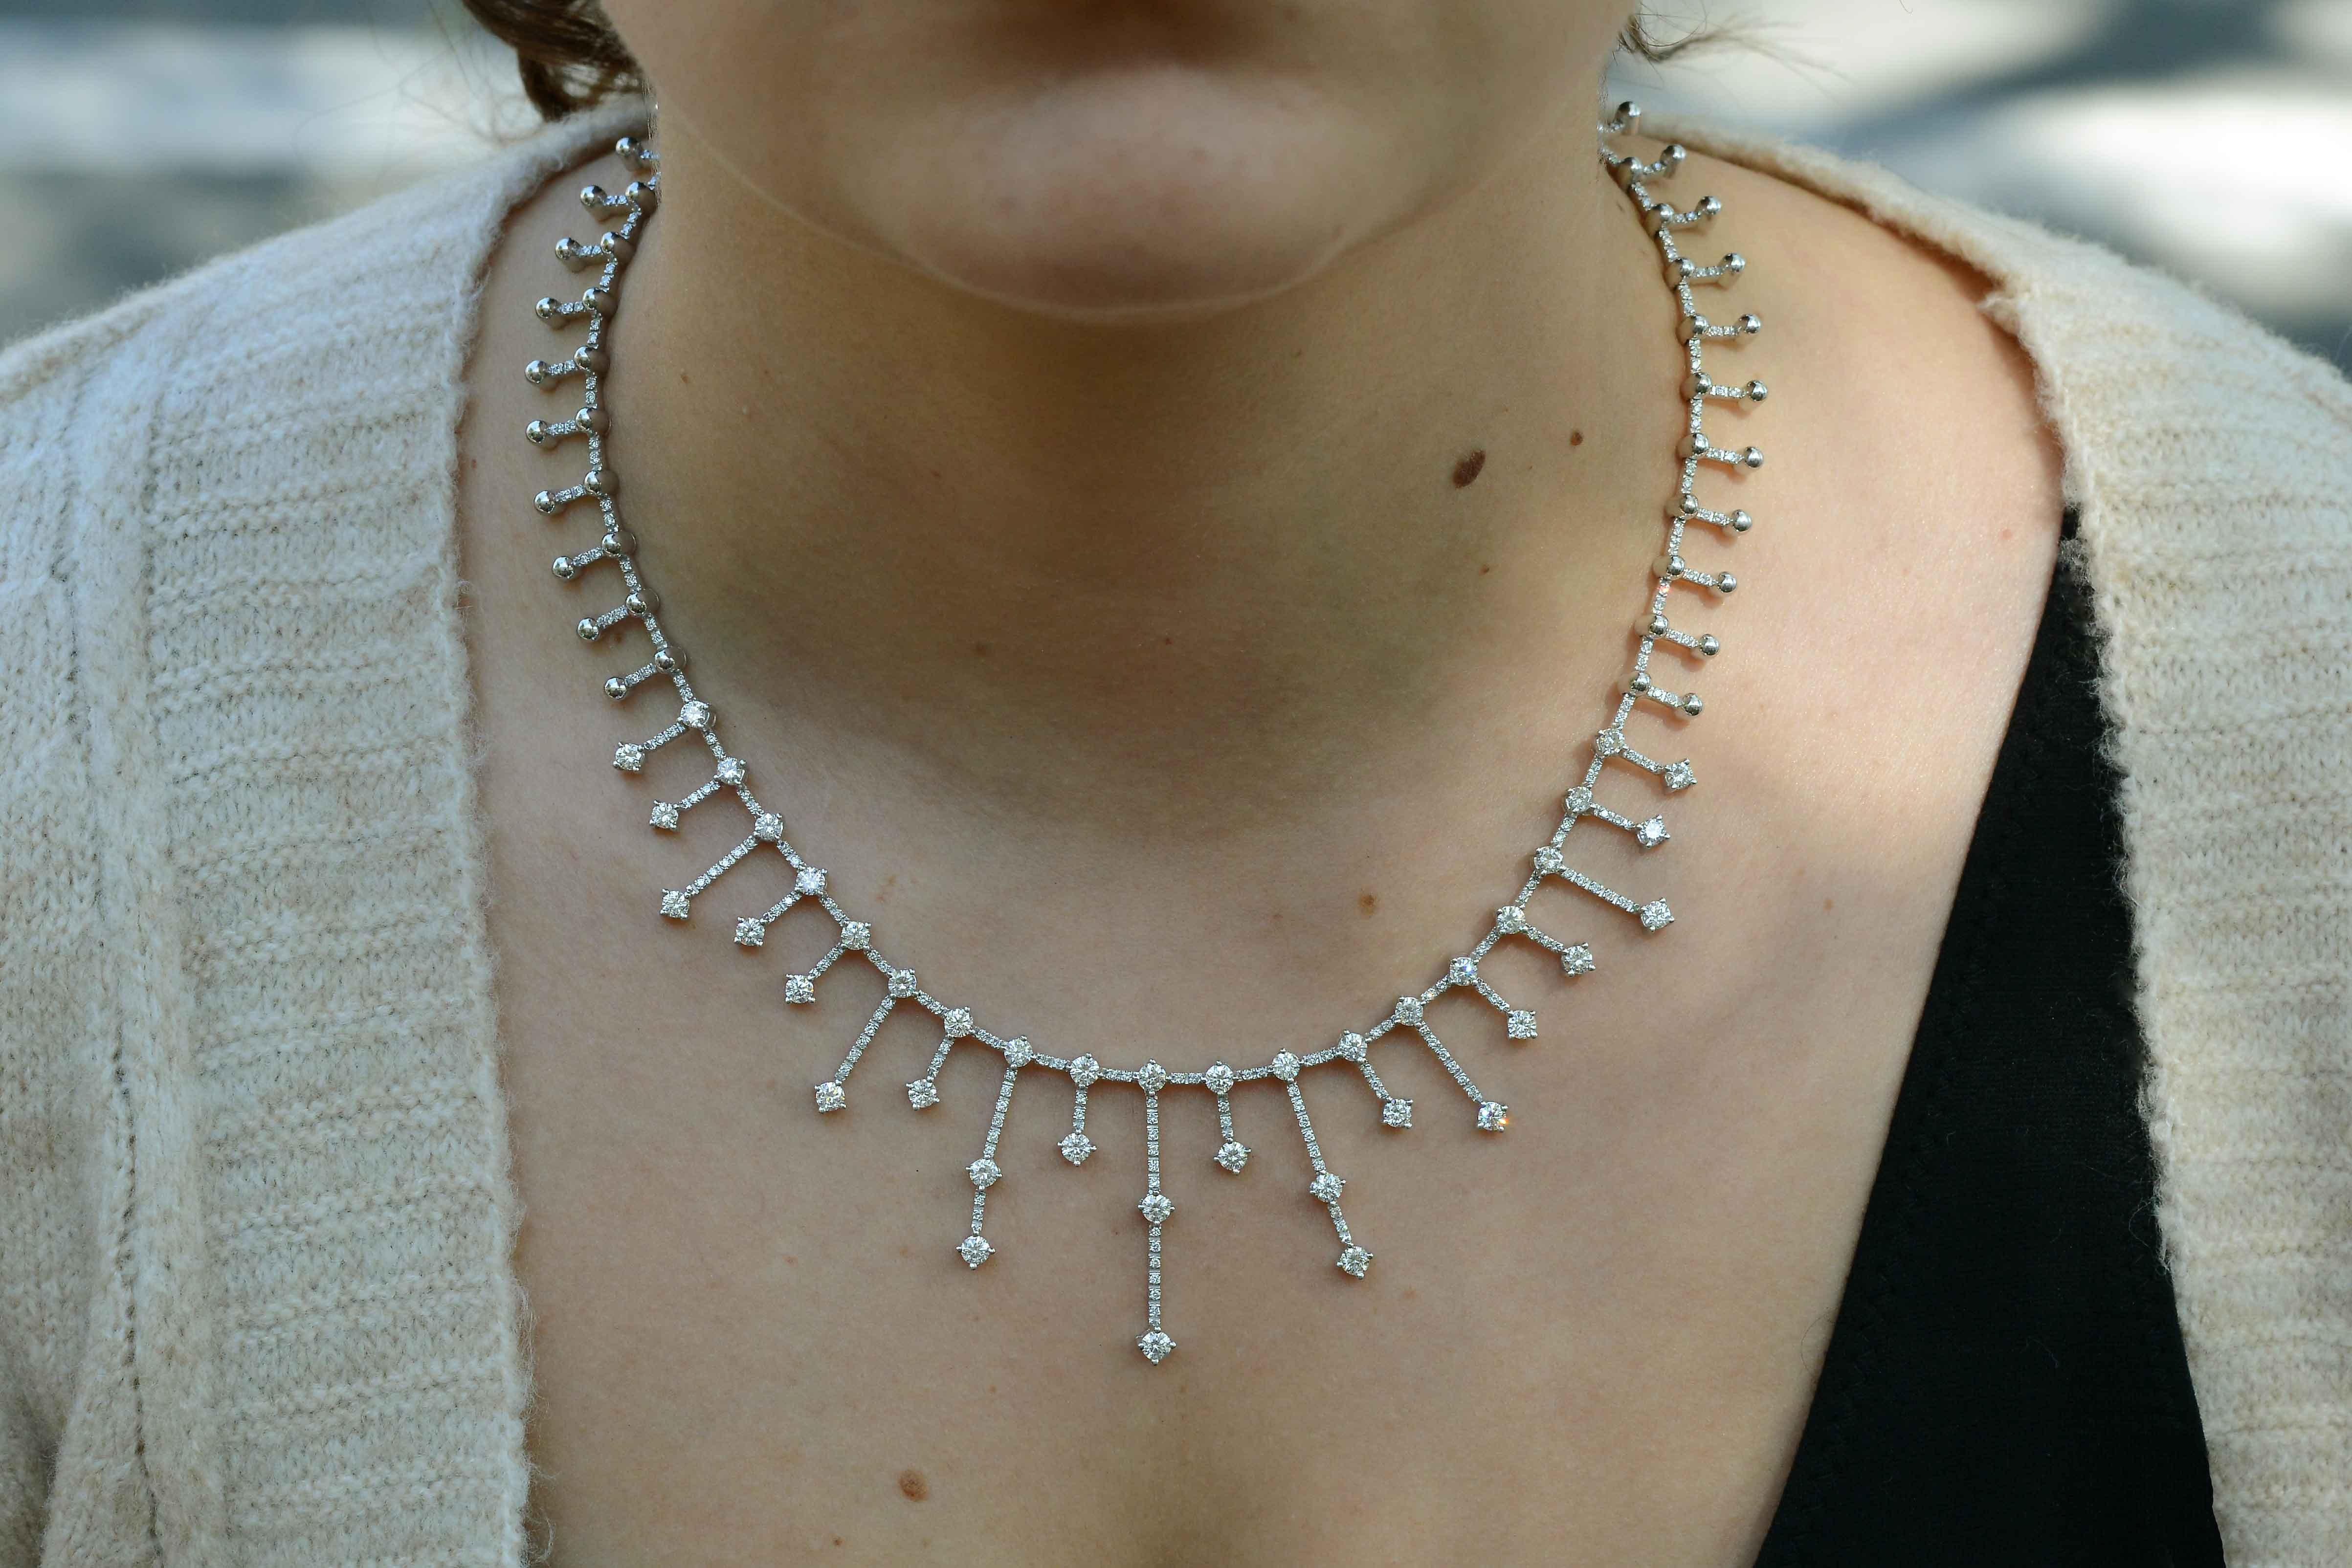 A staggering mid-century diamond necklace. This unique piece displays rays of round brilliant cut diamonds that radiate on an 18k white gold backdrop. An elegant showstopper that drapes elegantly on your neck resembling a choker, but not a tight